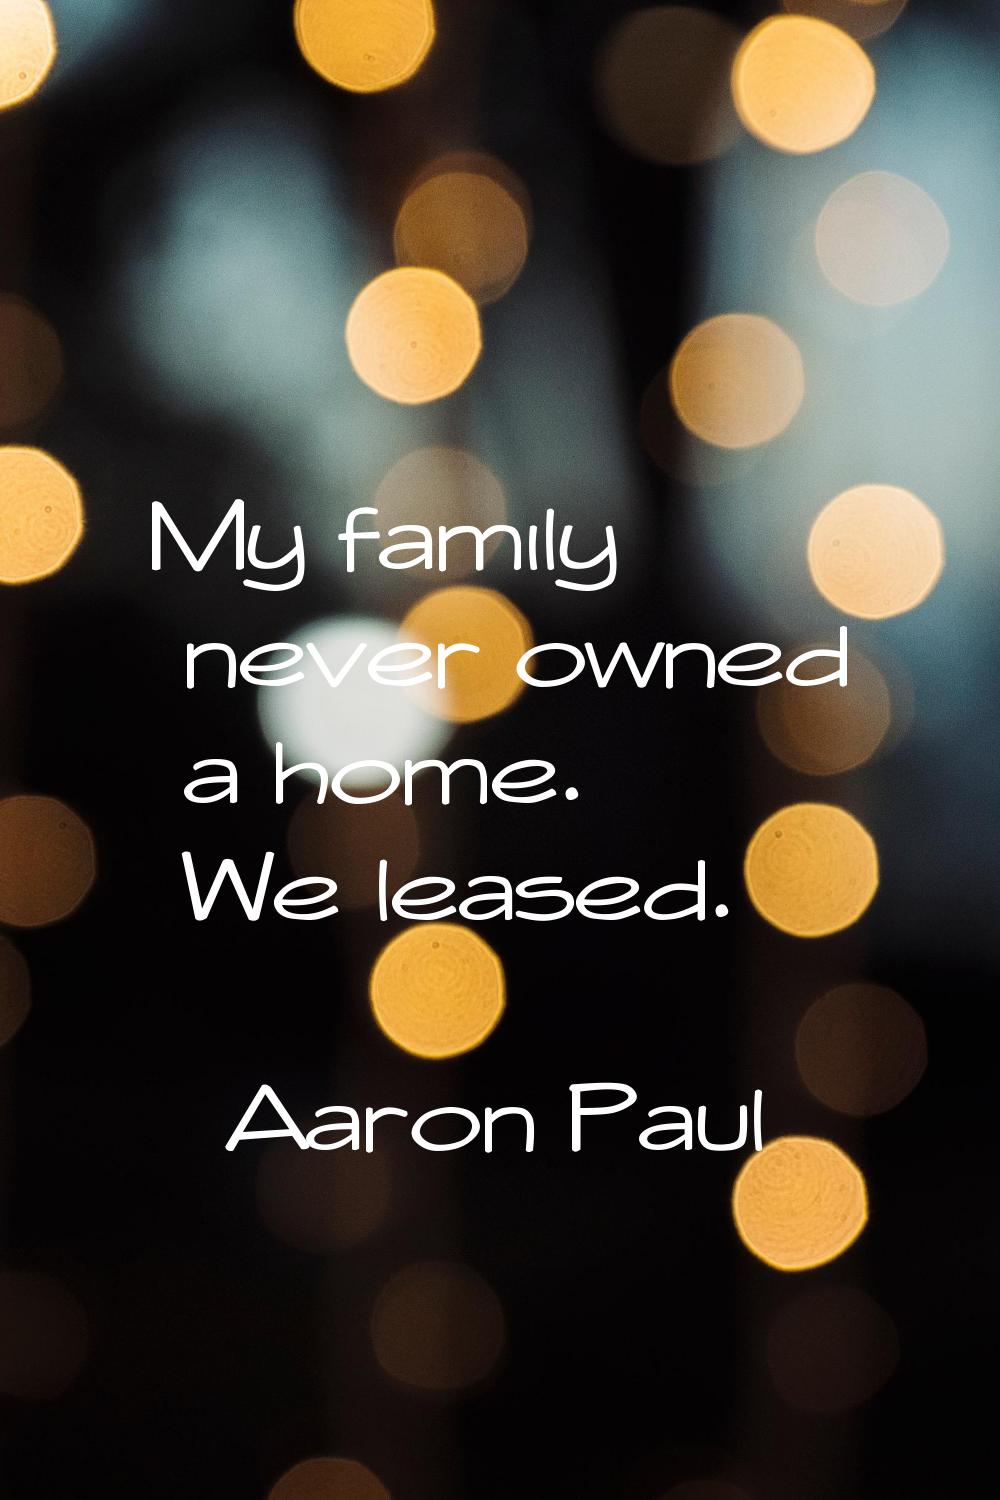 My family never owned a home. We leased.